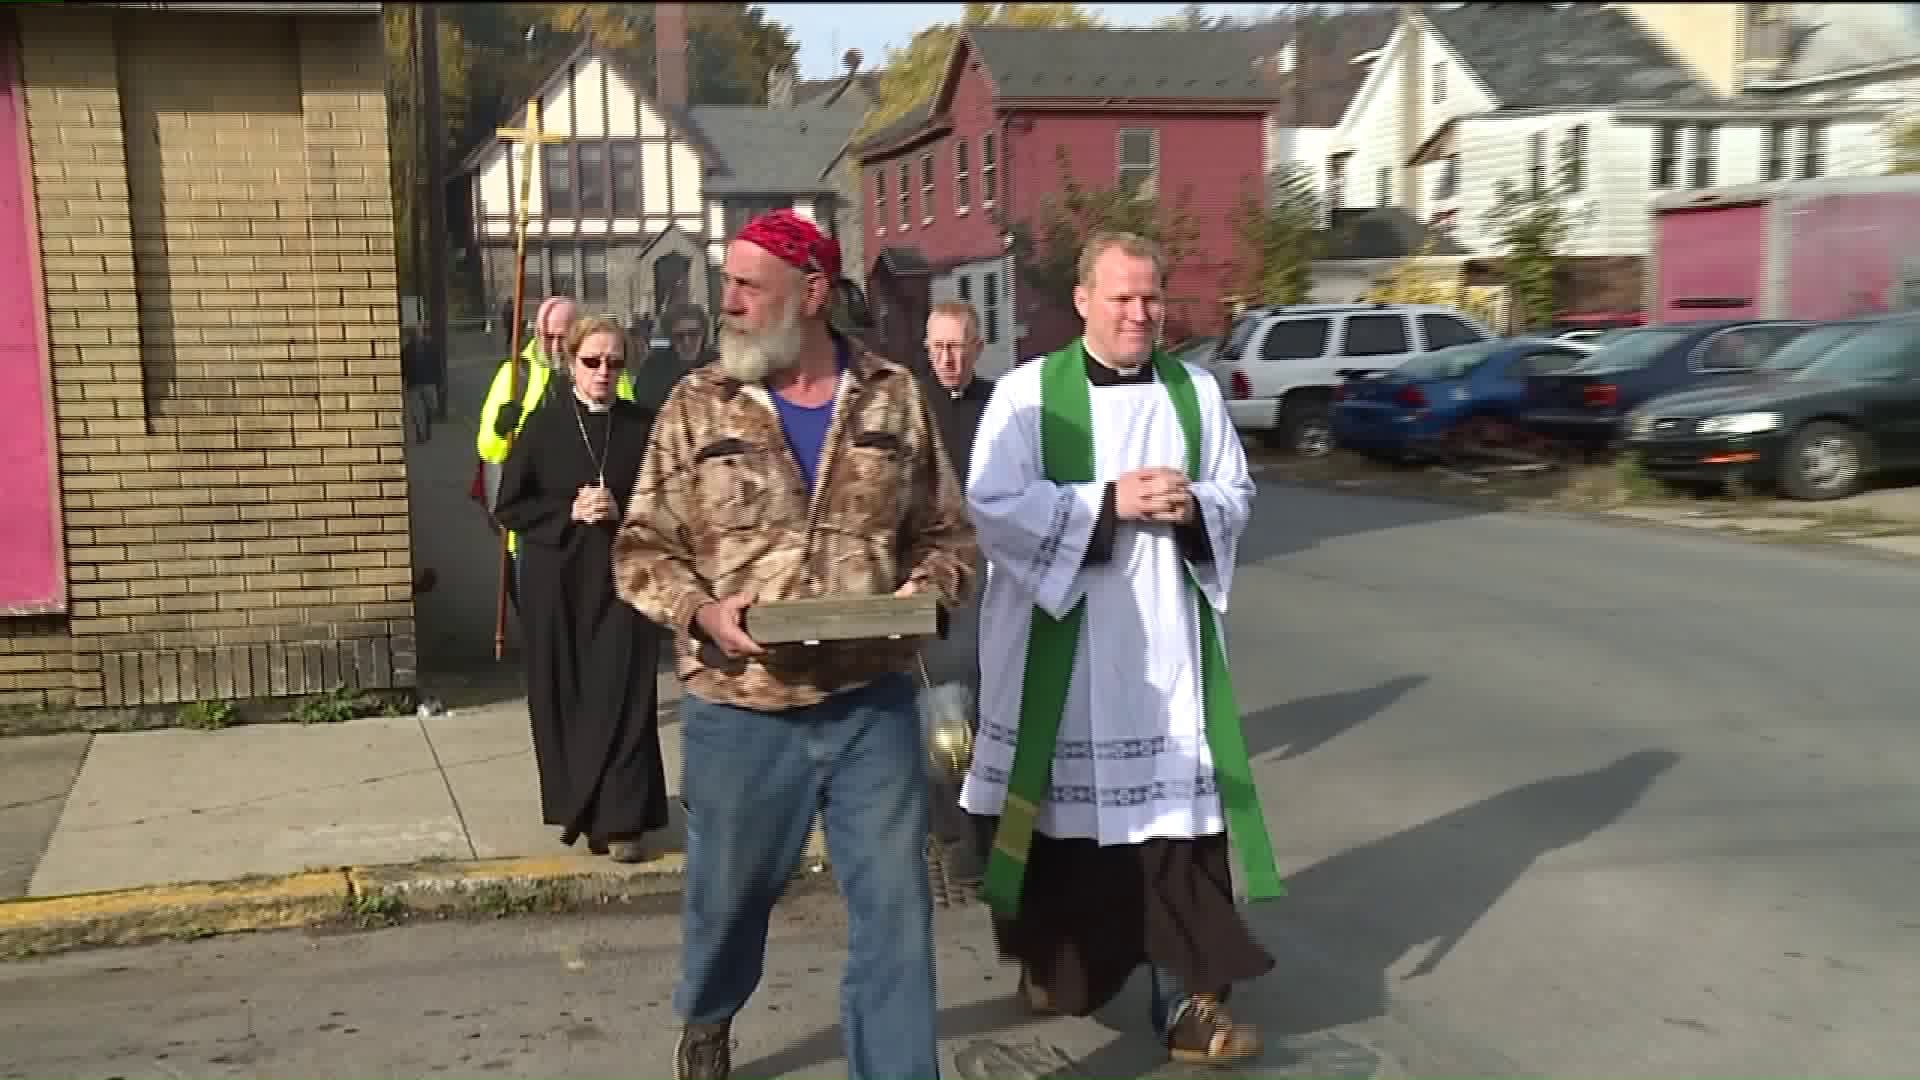 As One Church Closes, Members Go on Seven Mile Pilgrimage to New Church